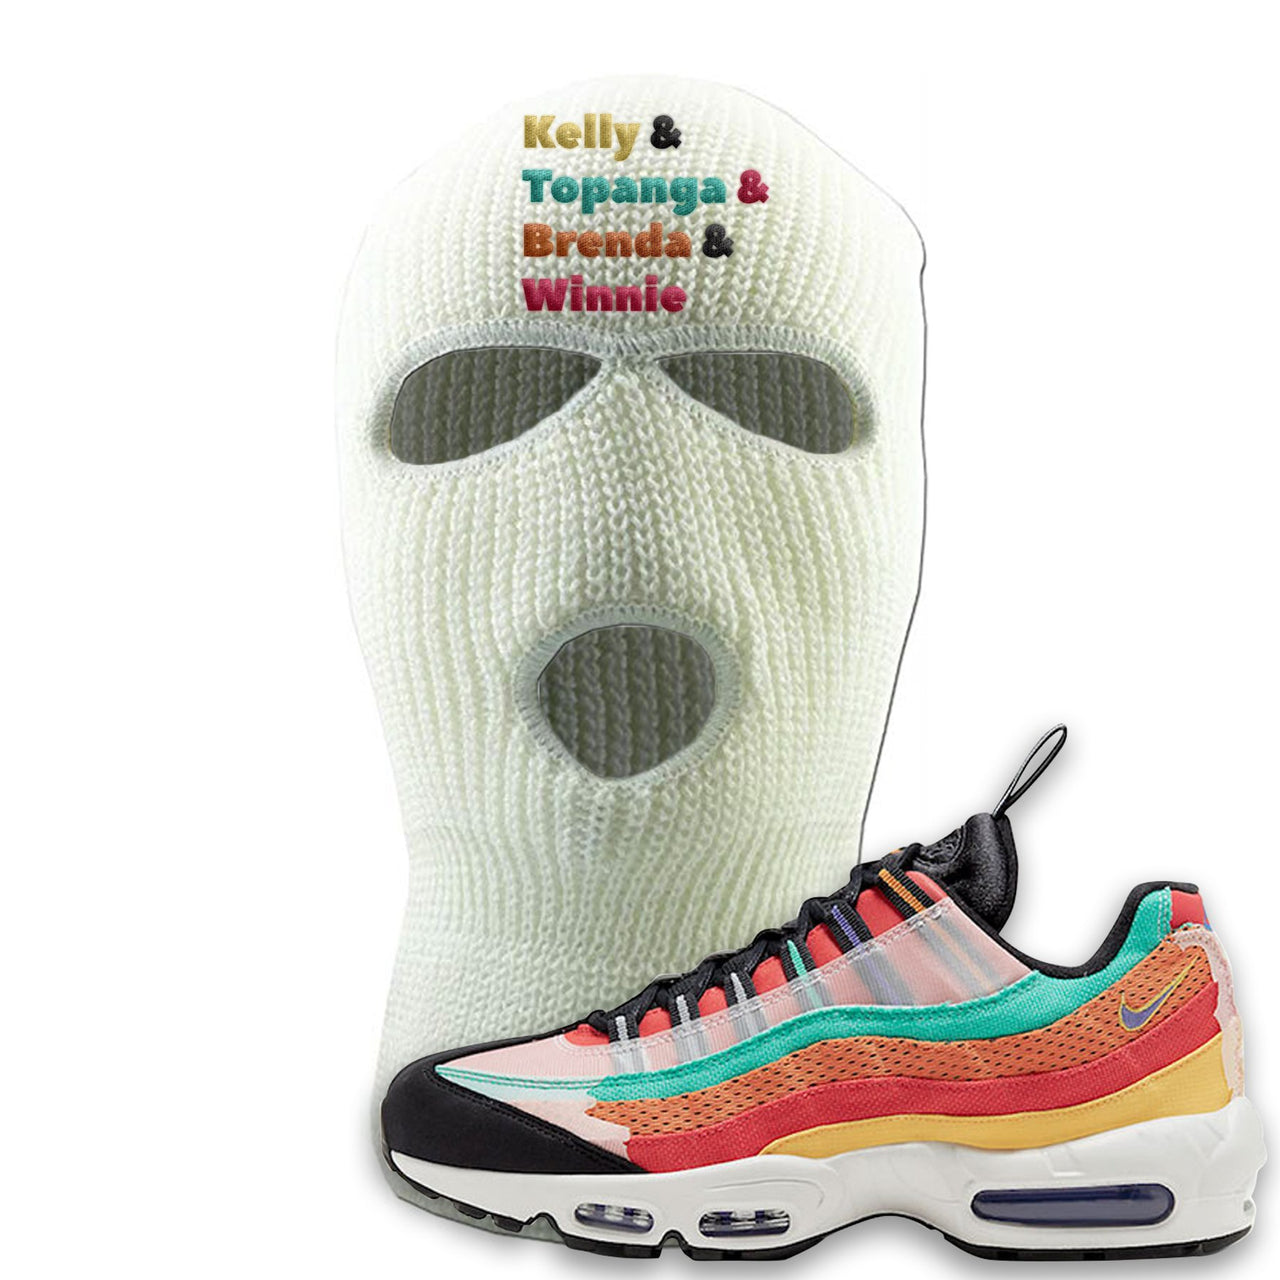 Air Max 95 Black History Month Sneaker White Ski Mask | Winter Mask to match Air Max 95 Black History Month Shoes | Kelly And Gang